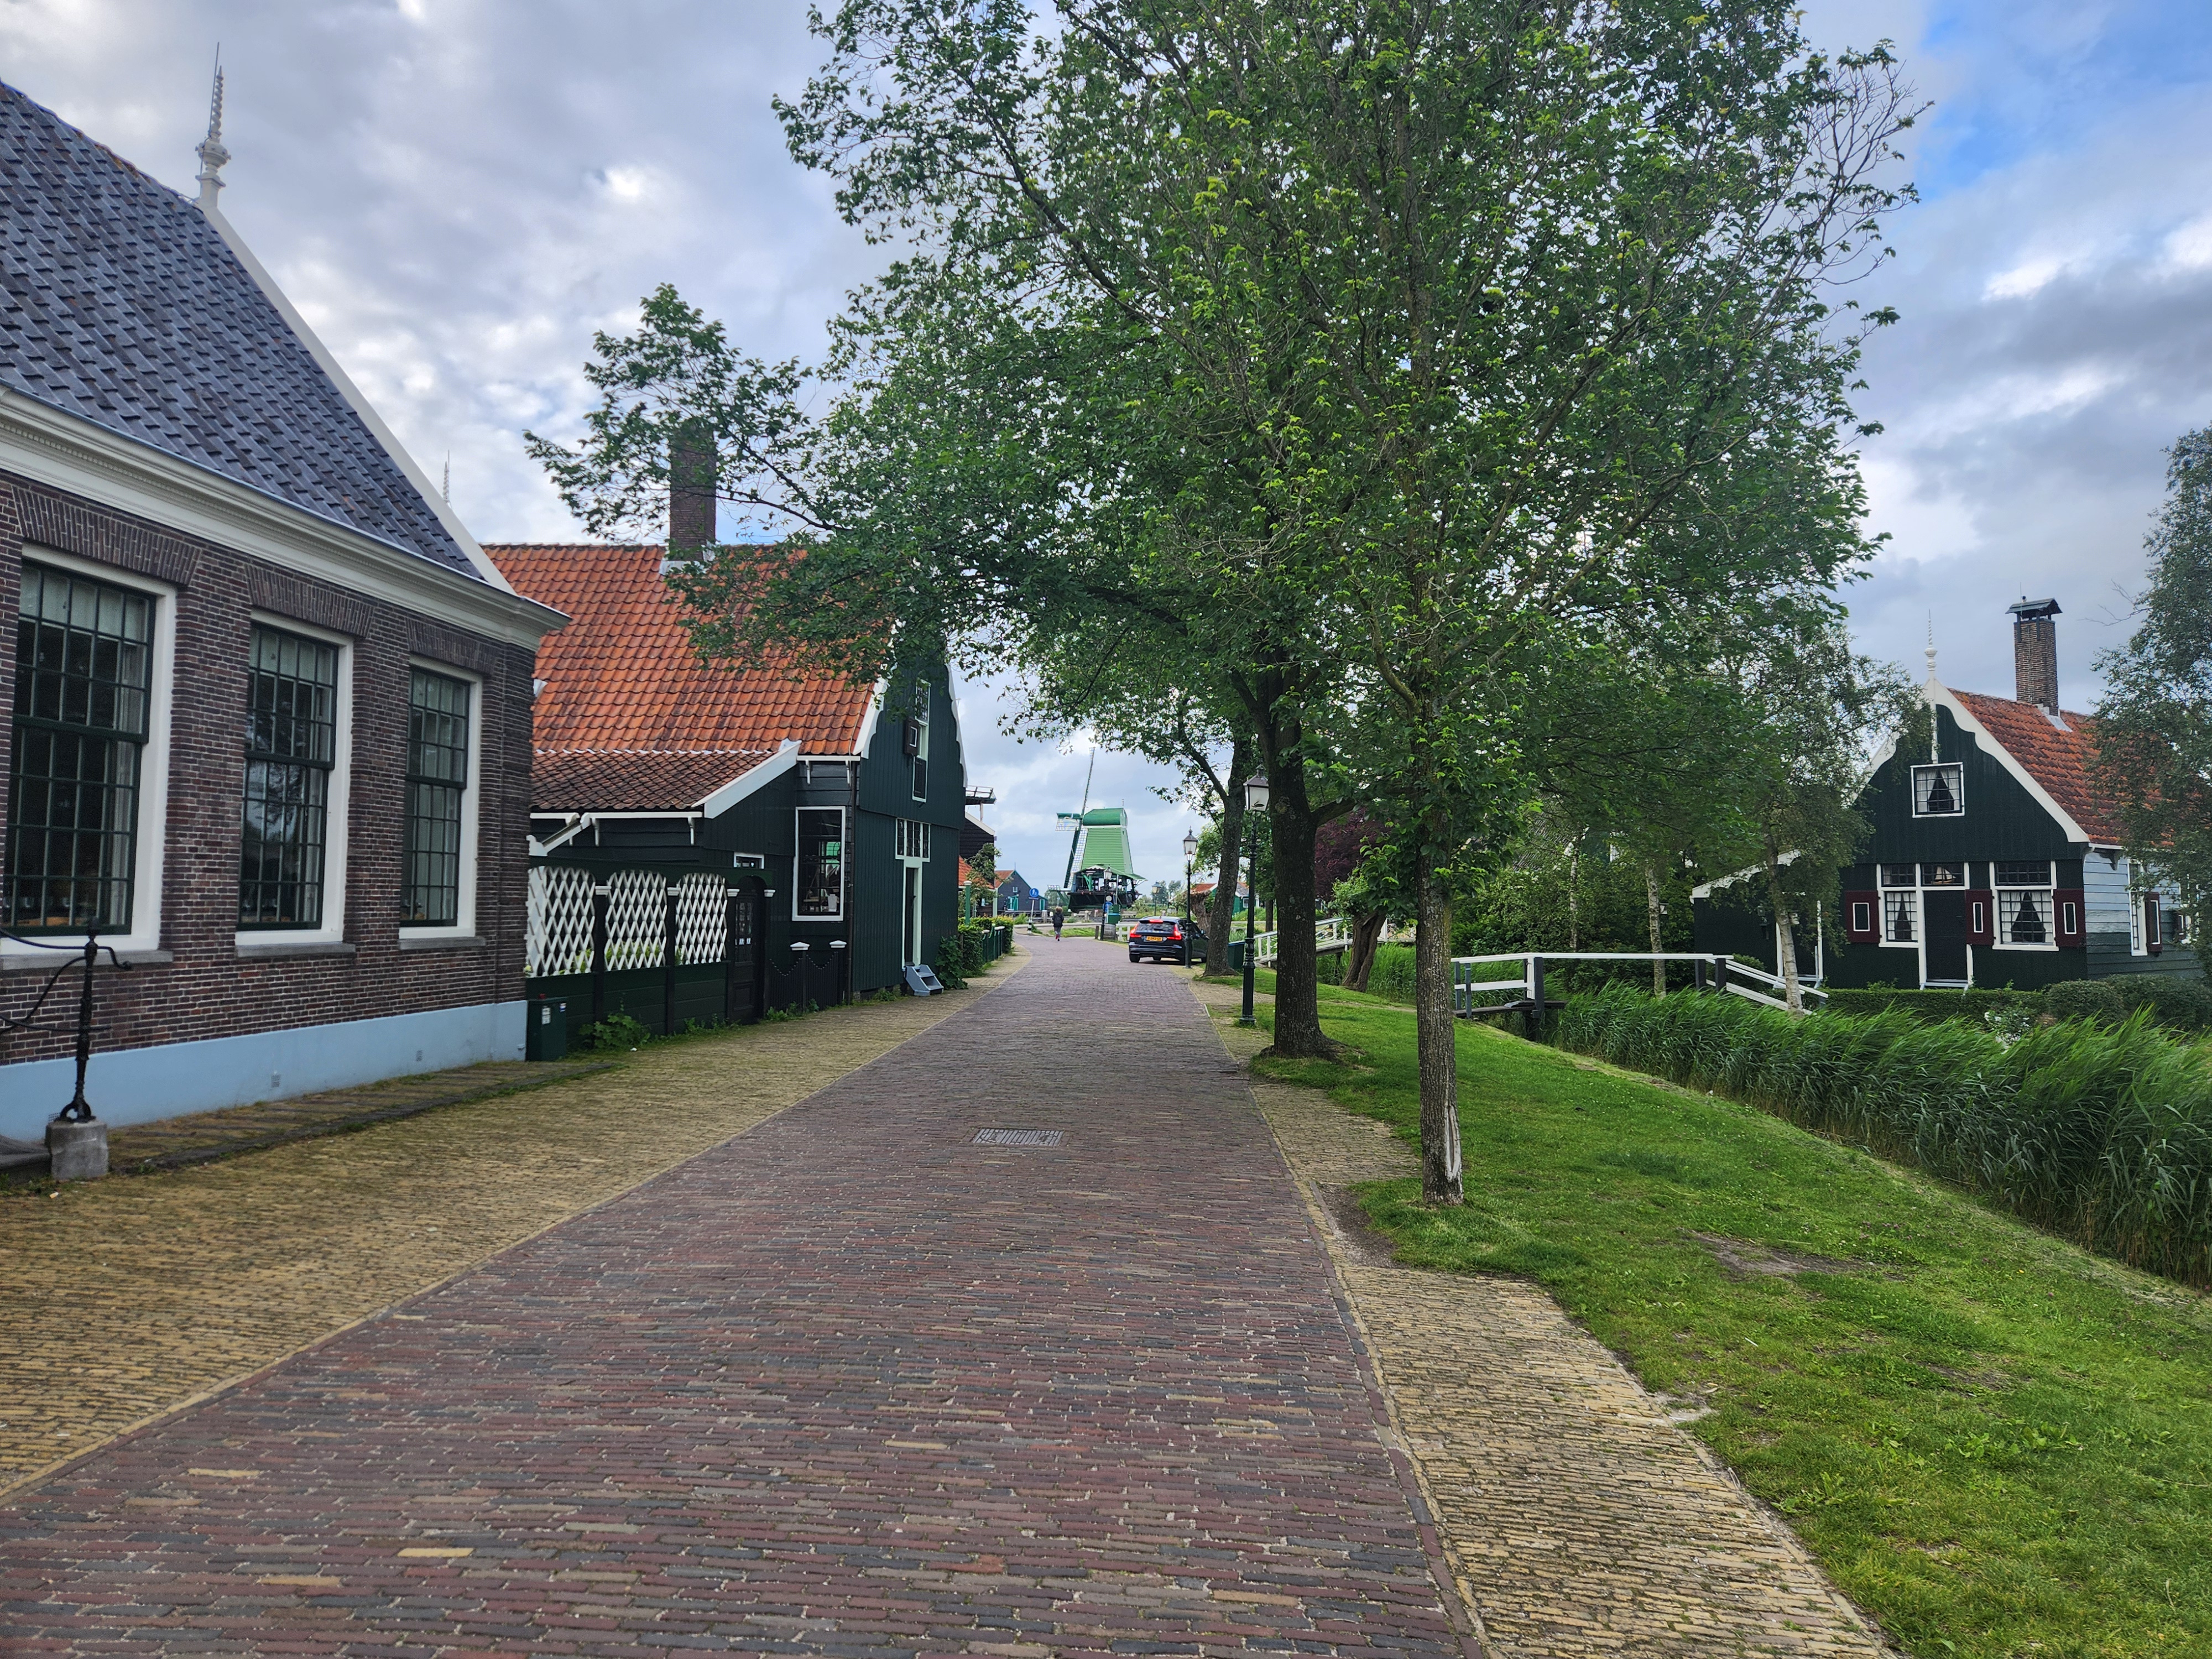 Wooden houses at Zaan Schaans, very beautiful but it has an air of Disneyland preservation about it